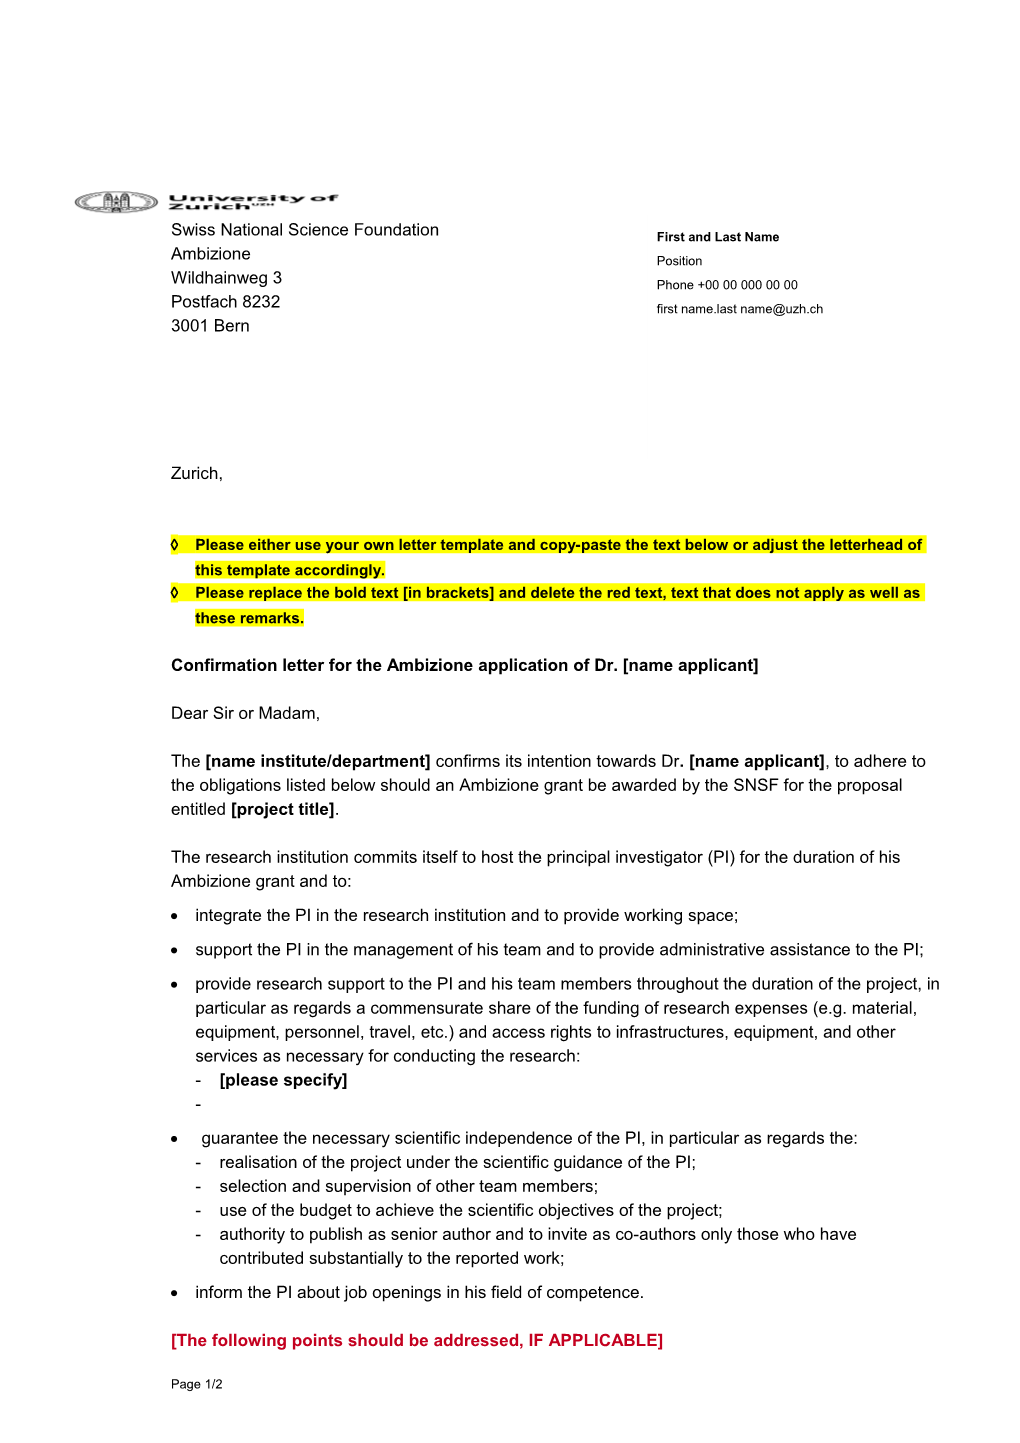 Confirmation Letter for the Ambizione Application of Dr. Name Applicant